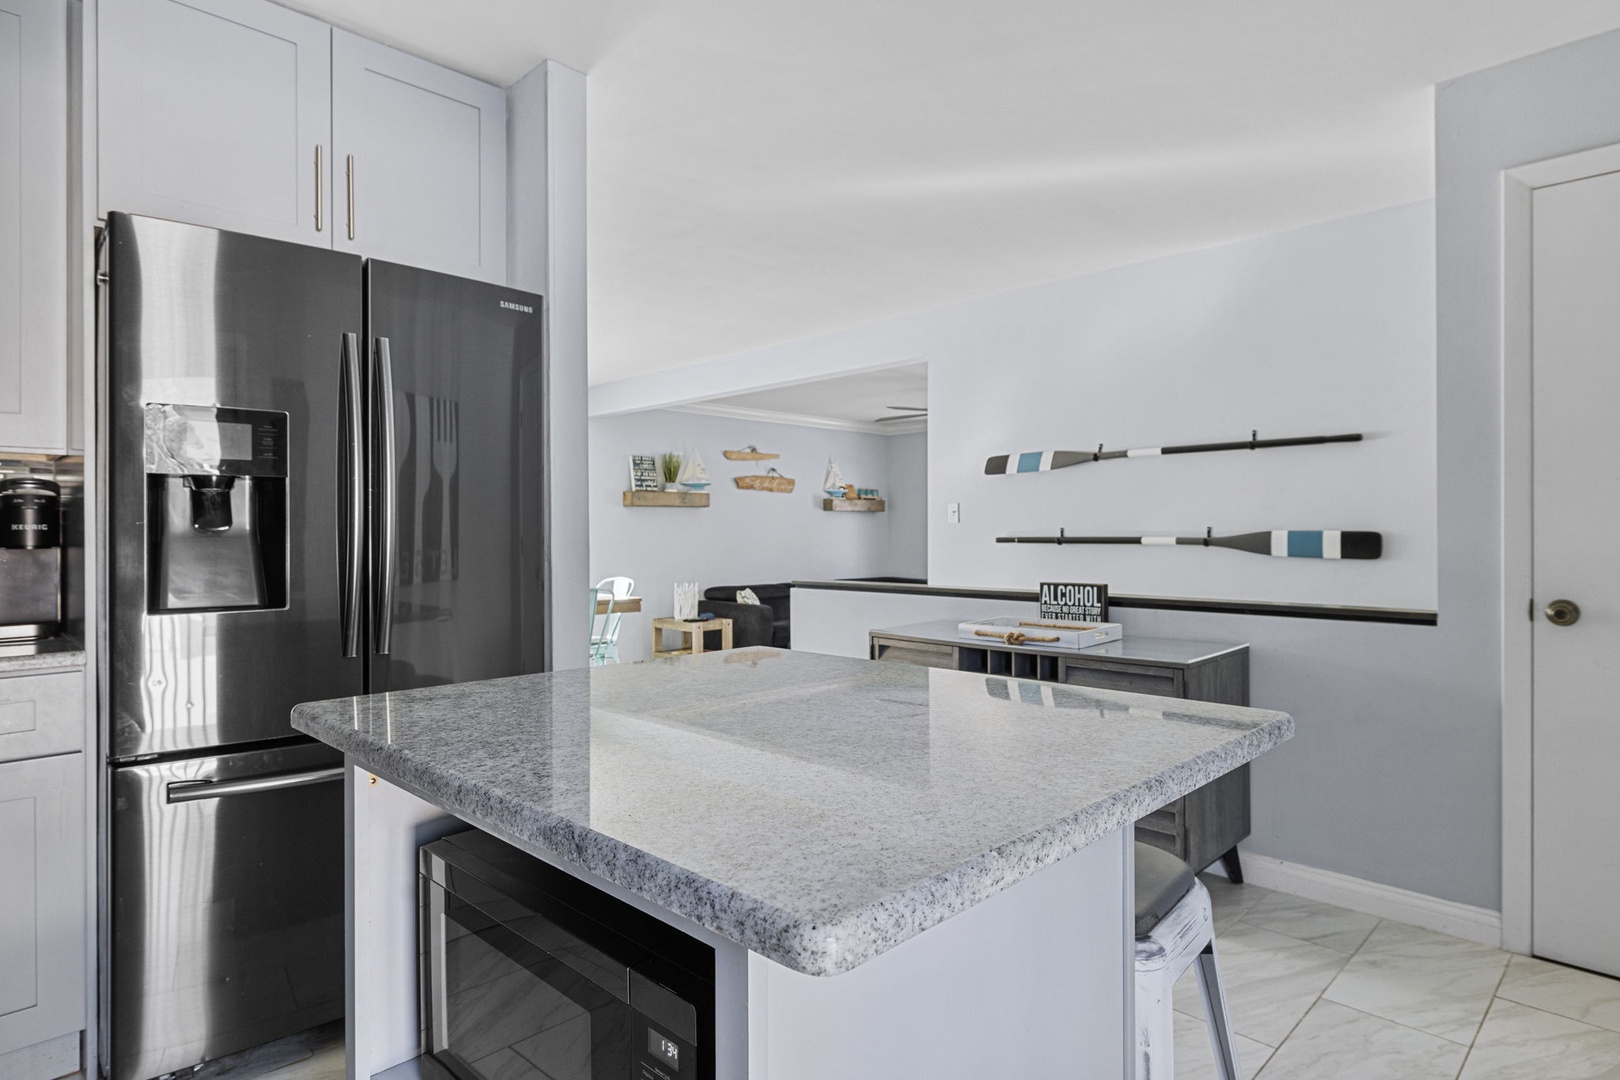 The Whit's modern kitchen has all top-end appliances for great meal-making.